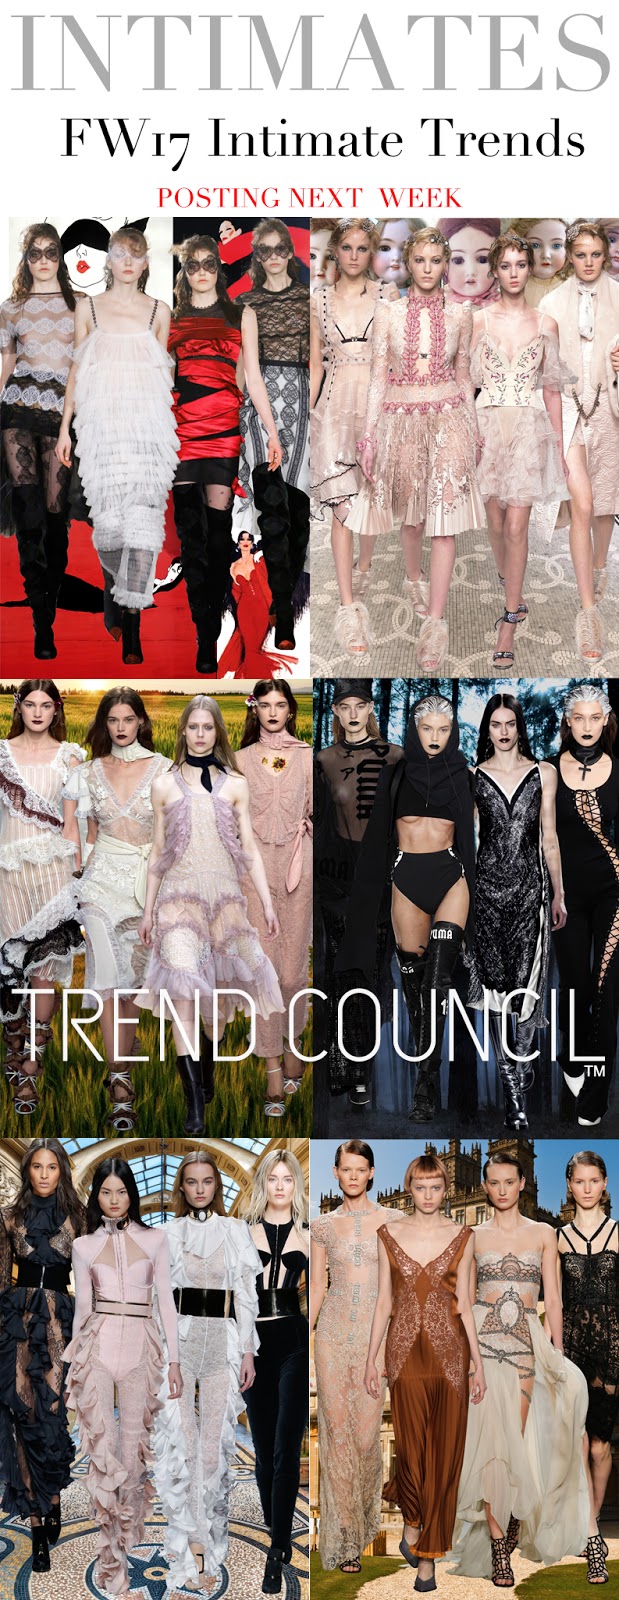 TRENDS // TREND COUNCIL INTIMATES TRENDS. FW17 FASHION